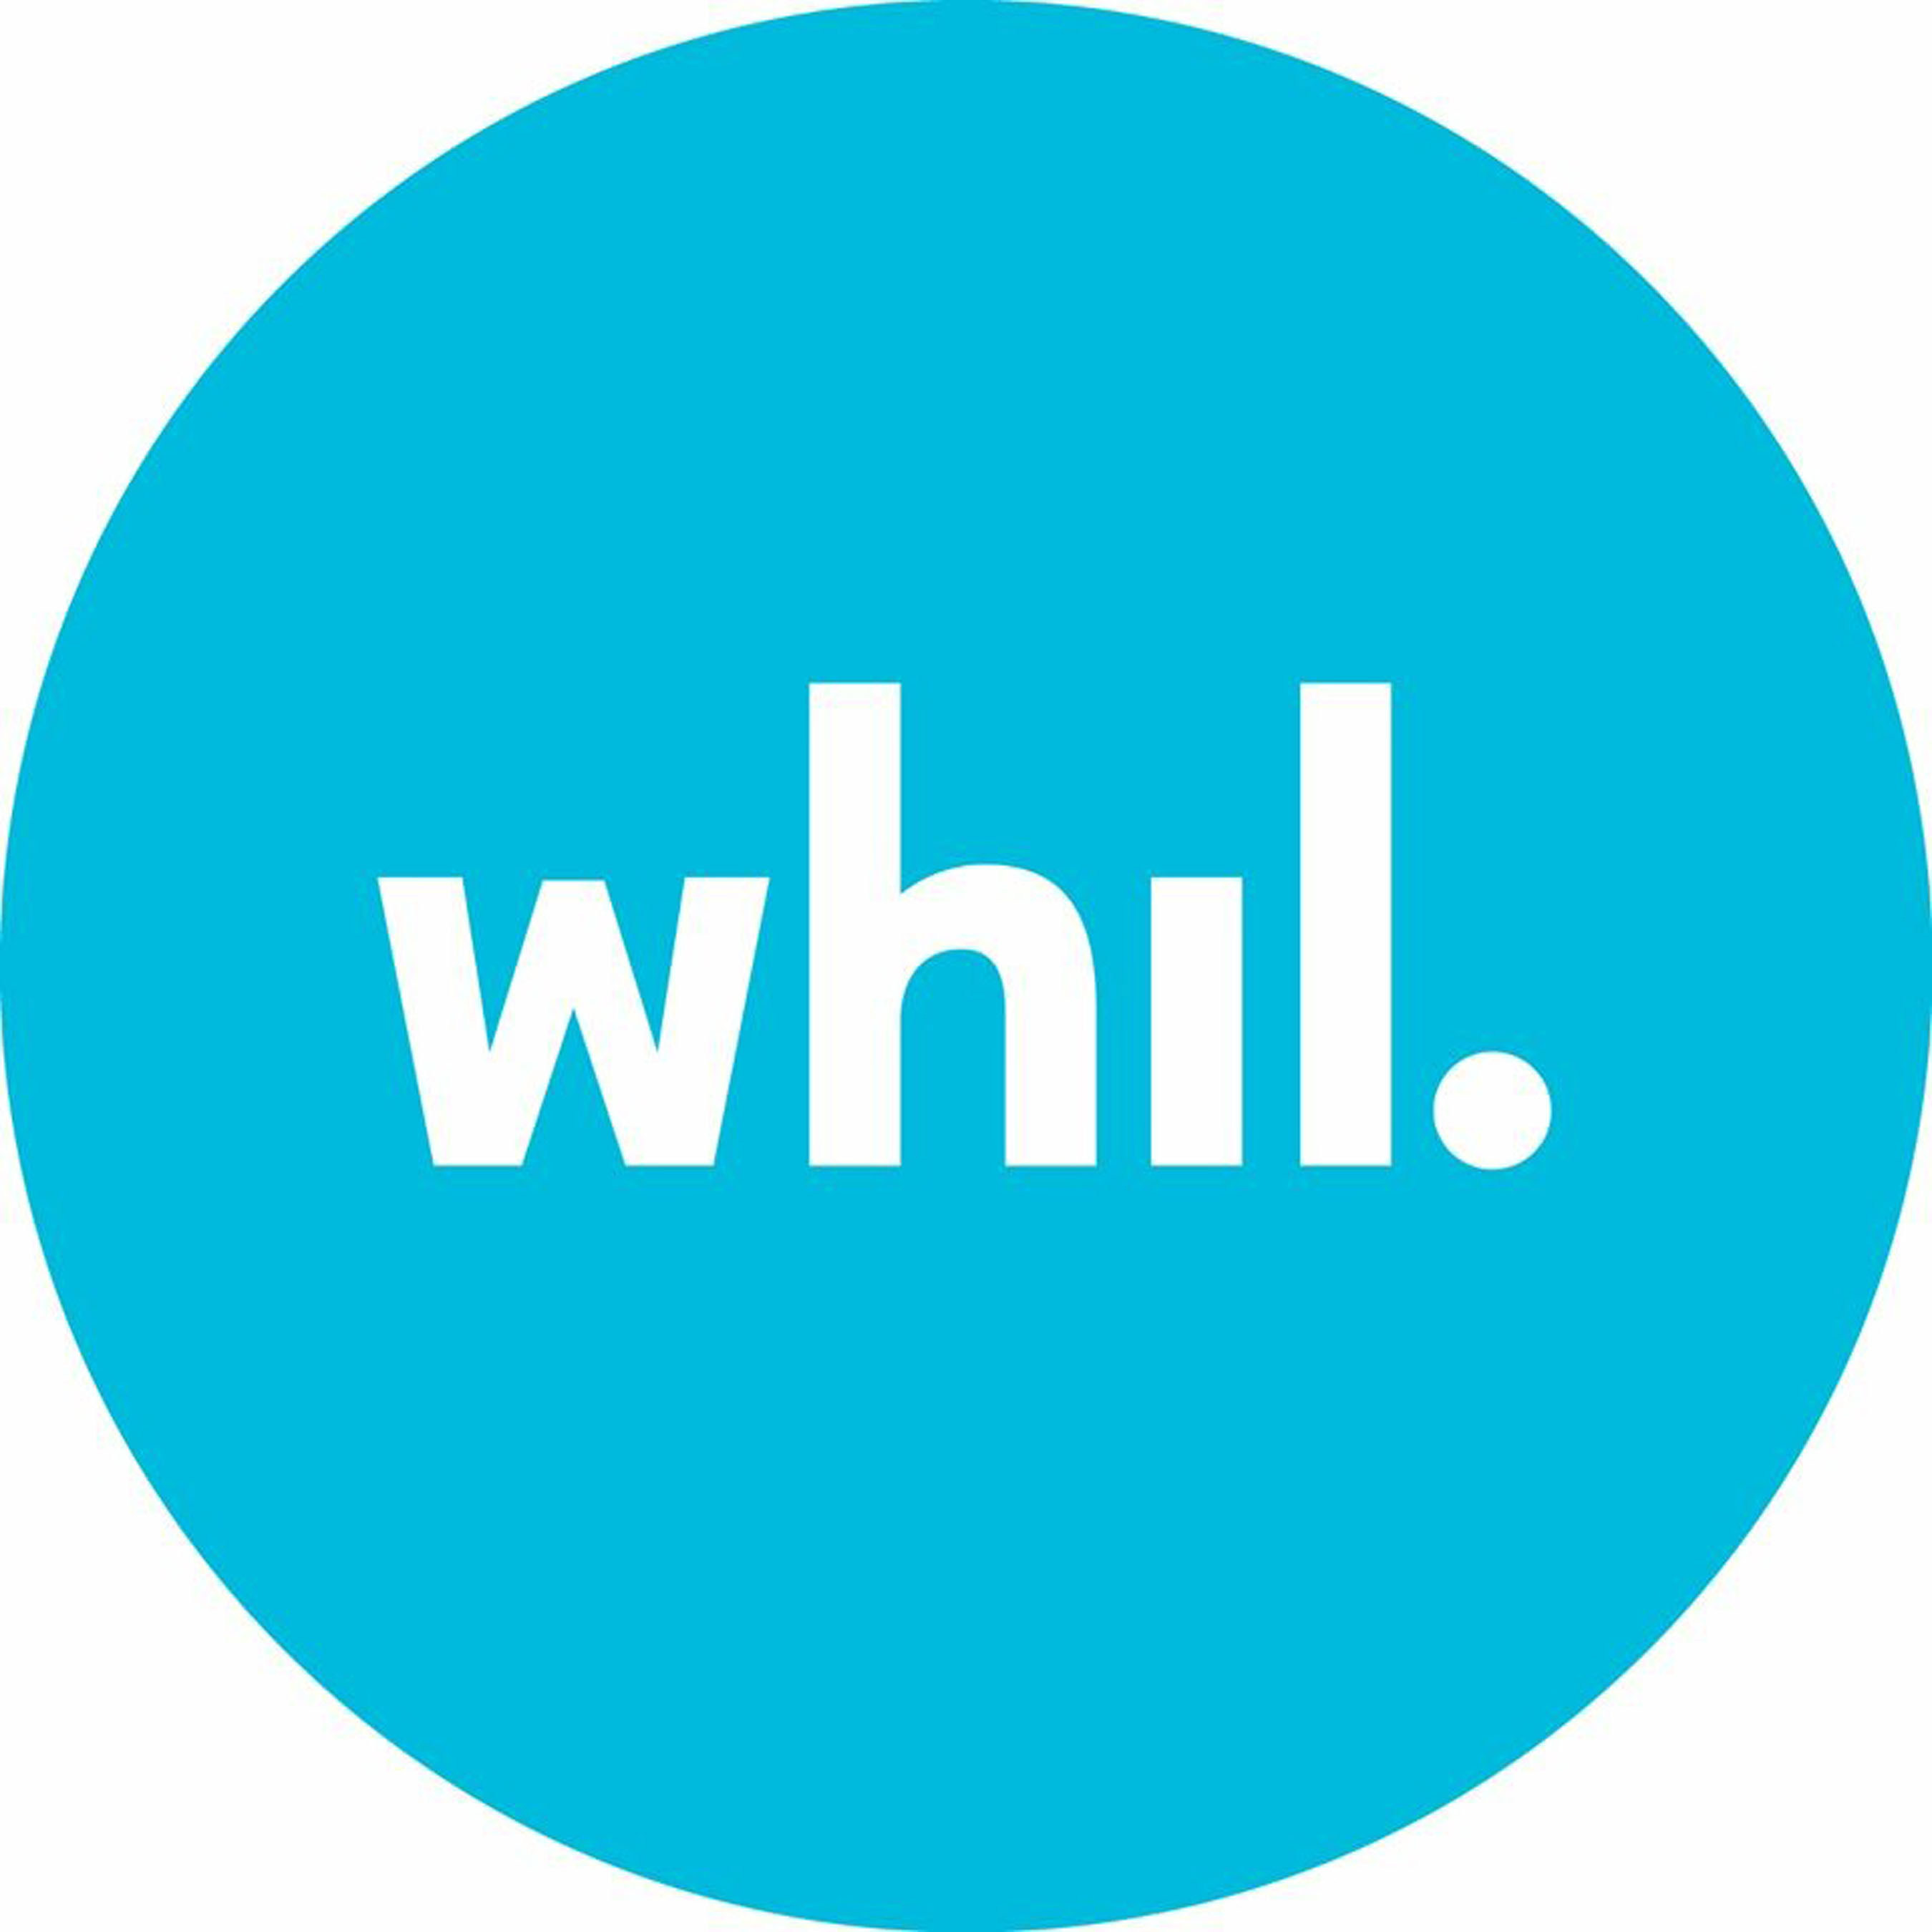 Introducing Whil, The First Digital Mindfulness, Yoga, and Leadership  Training Platform for Businesses